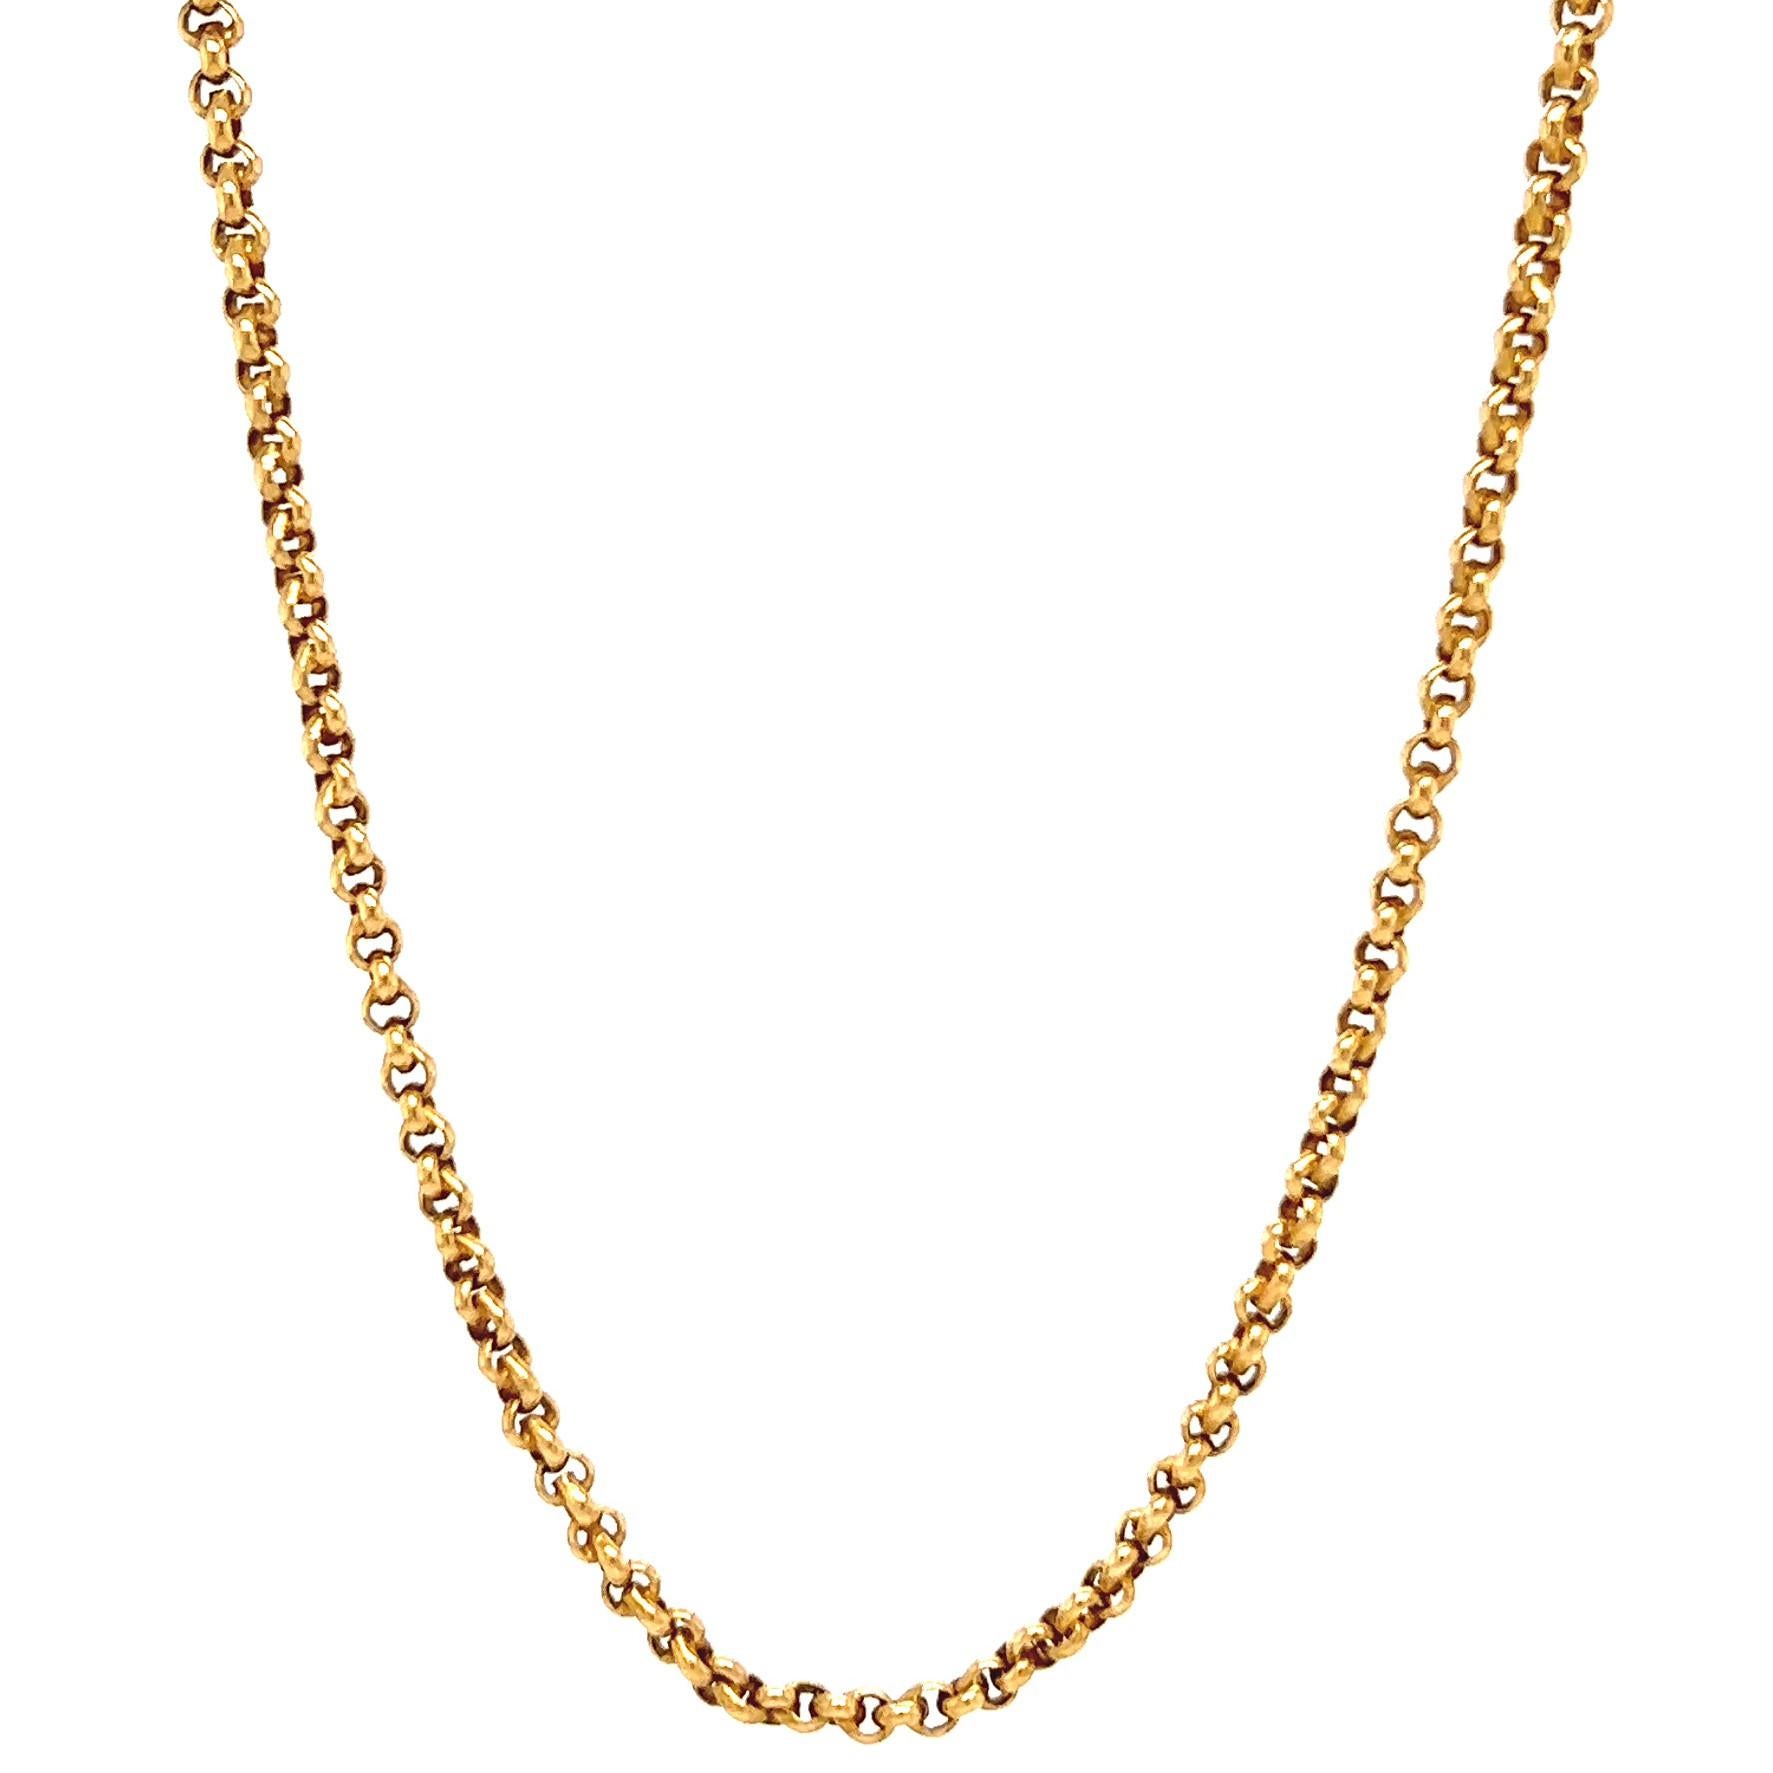 Vintage 18 Karat Yellow Gold Cable Chain Necklace 2